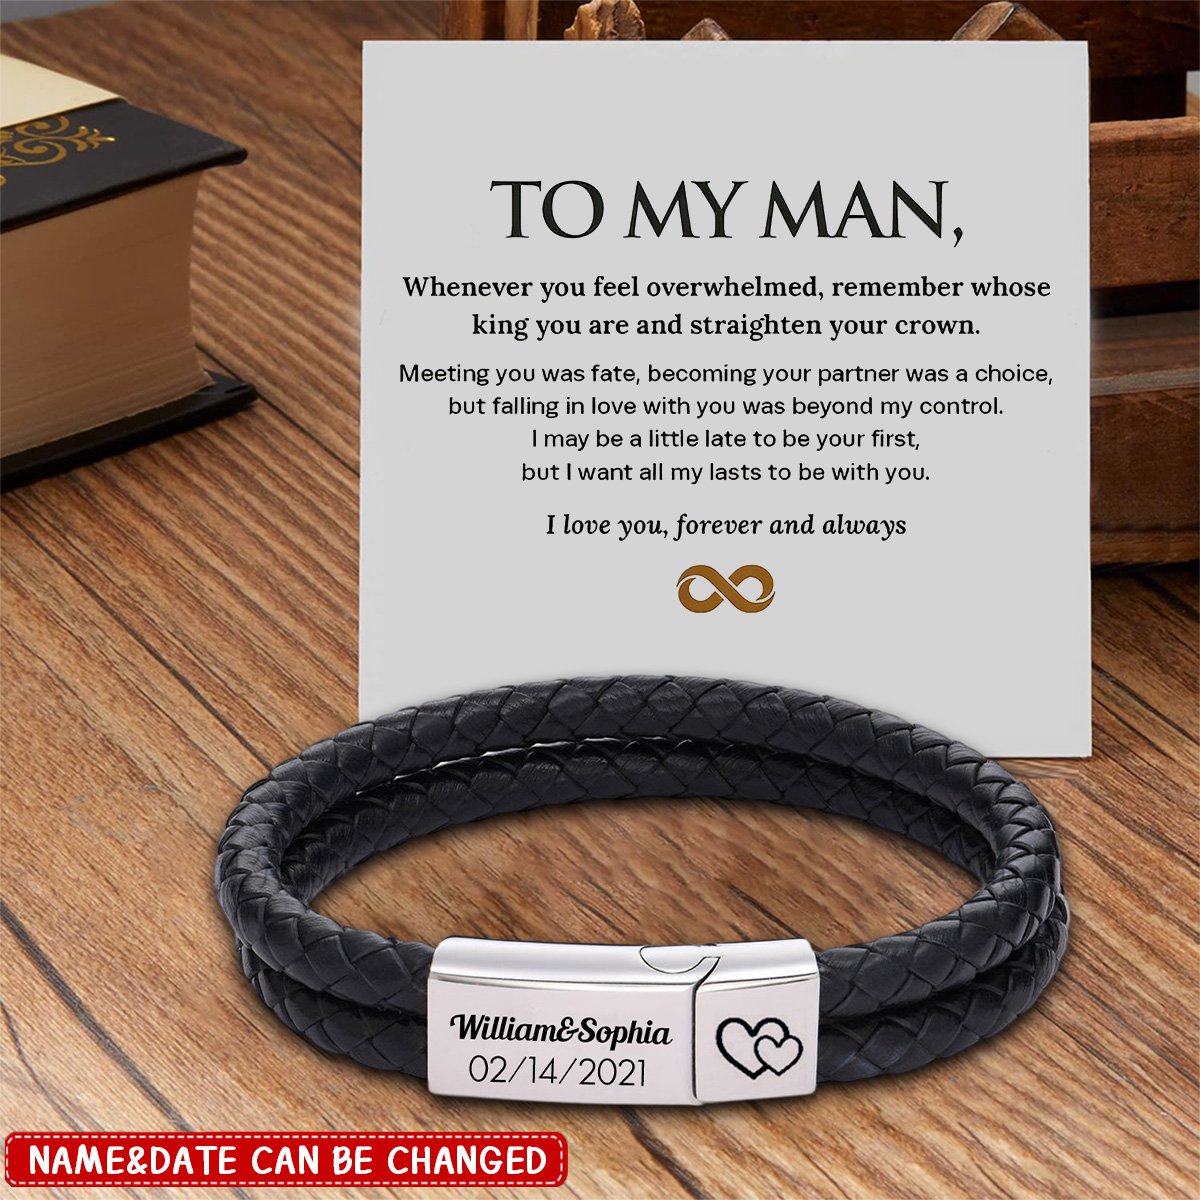 To My Man,Personalized Leather Stainless Steel Men's Engraved Bracelet